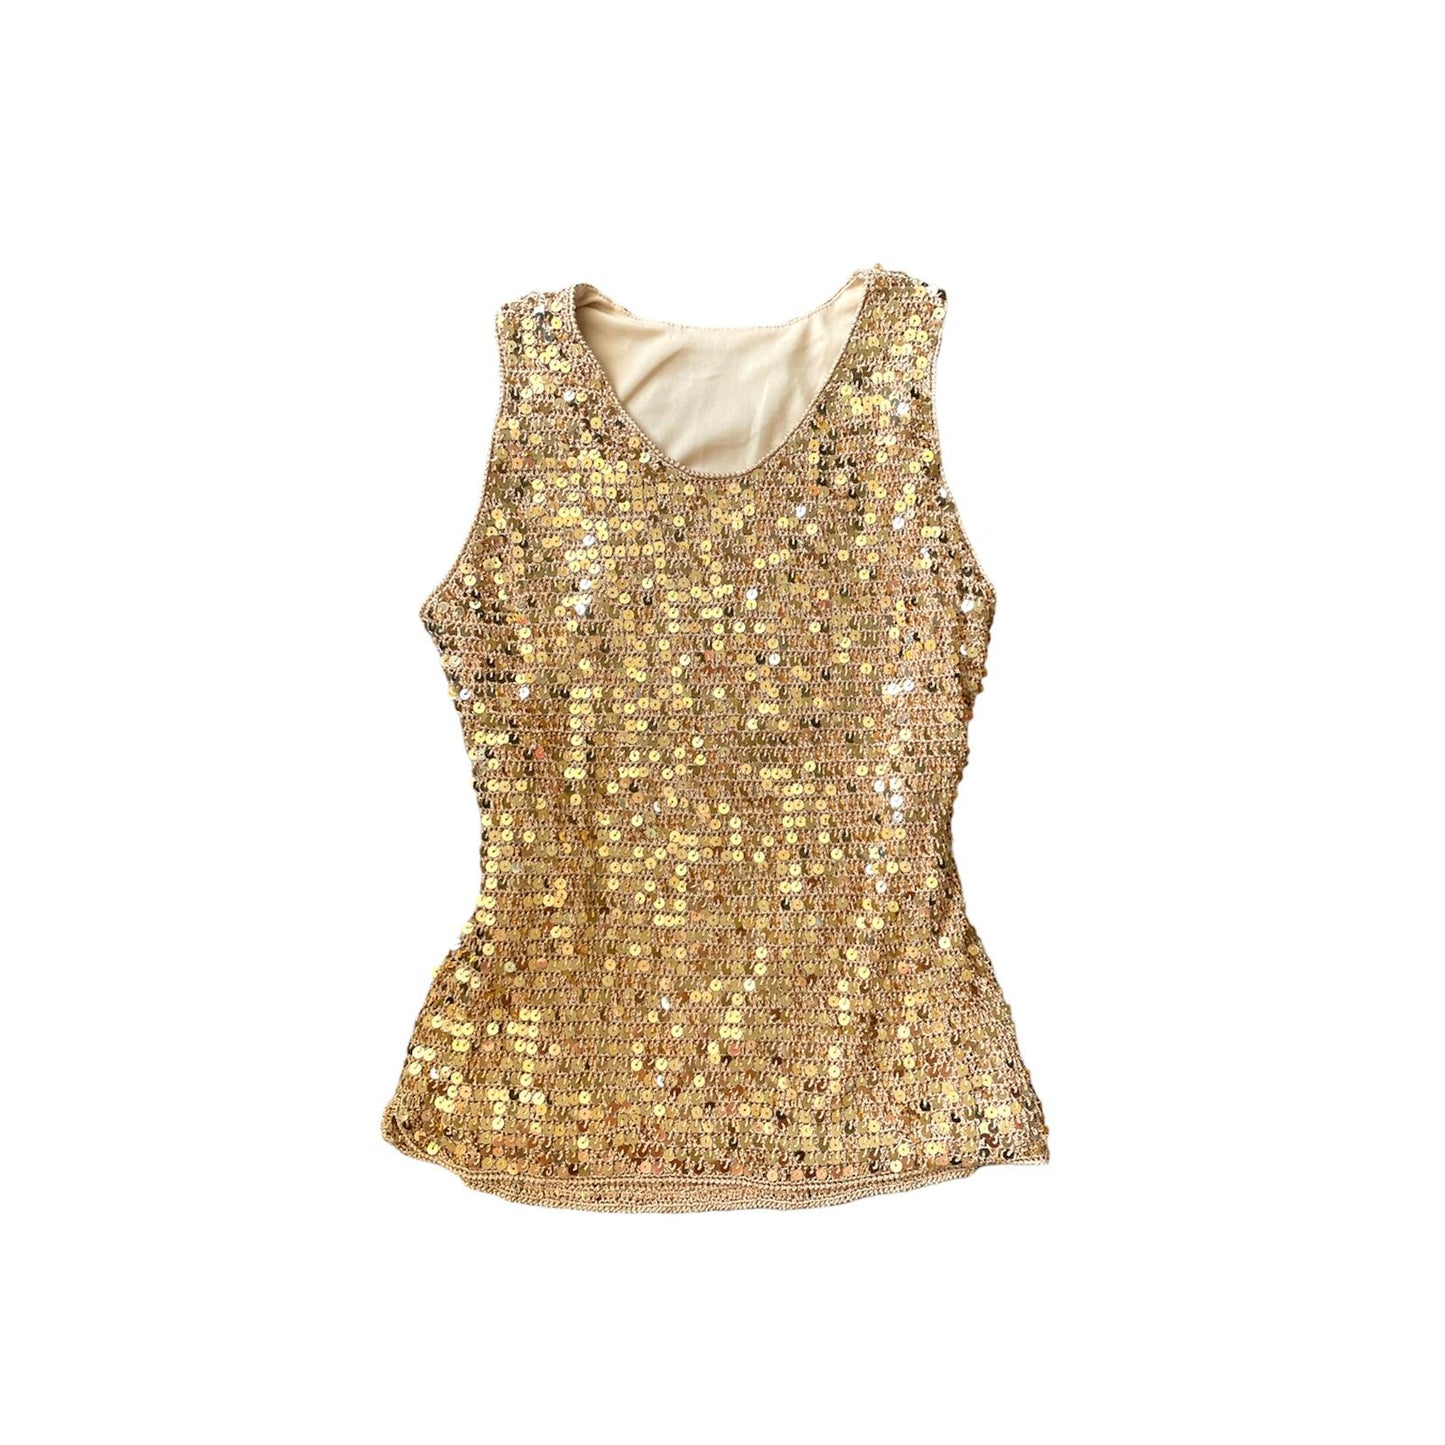 Sequin Tank Top Fashion Aftermath